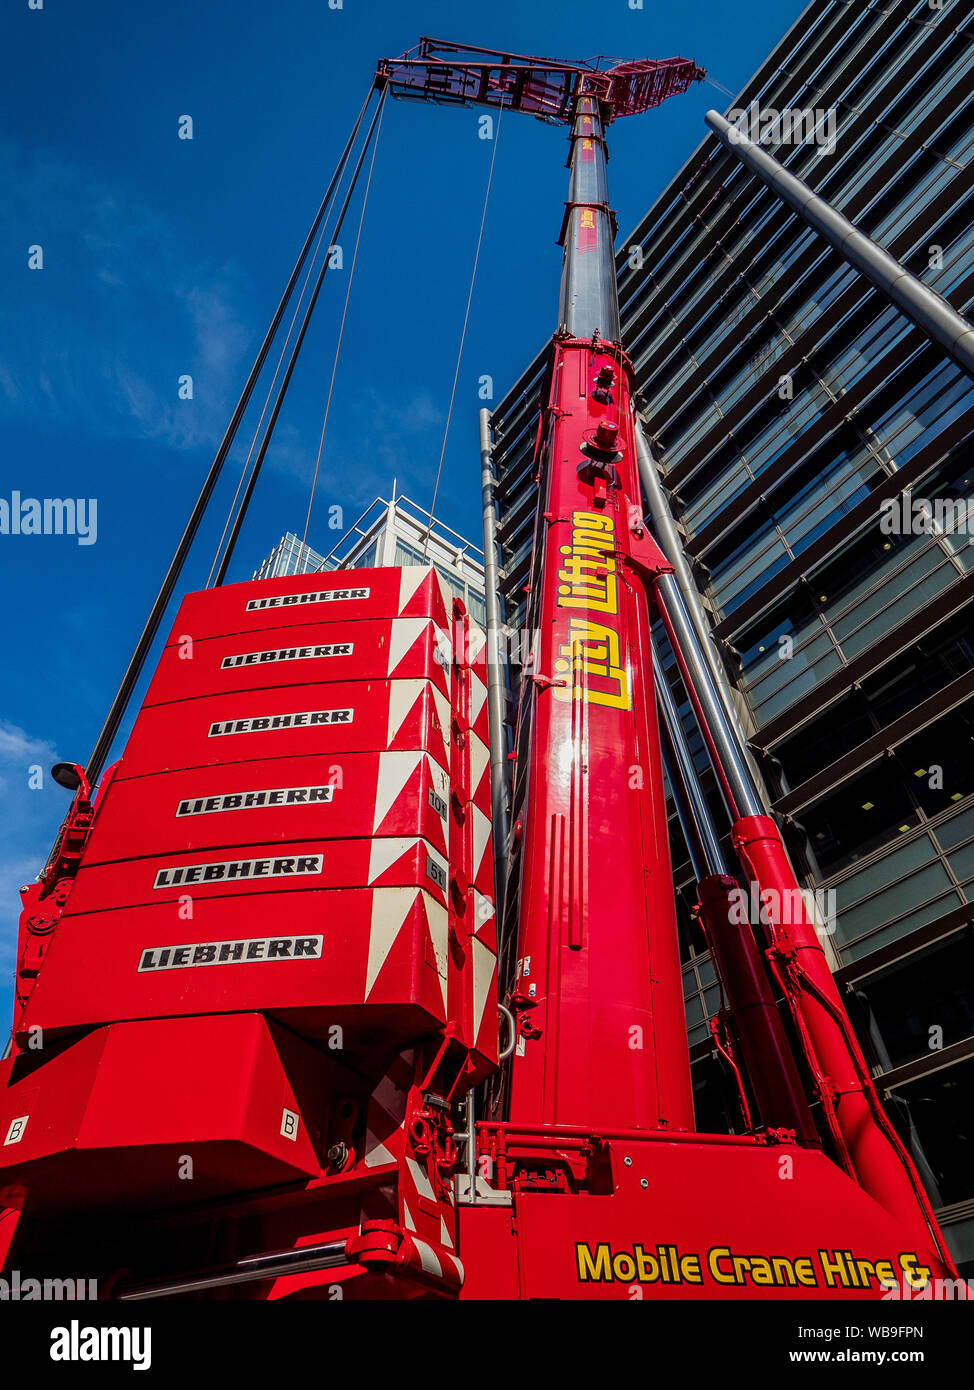 Large Crane London - Mobile Crane from the City Lifting Company outside a Natwest Bank building in the City of London Financial District. Stock Photo